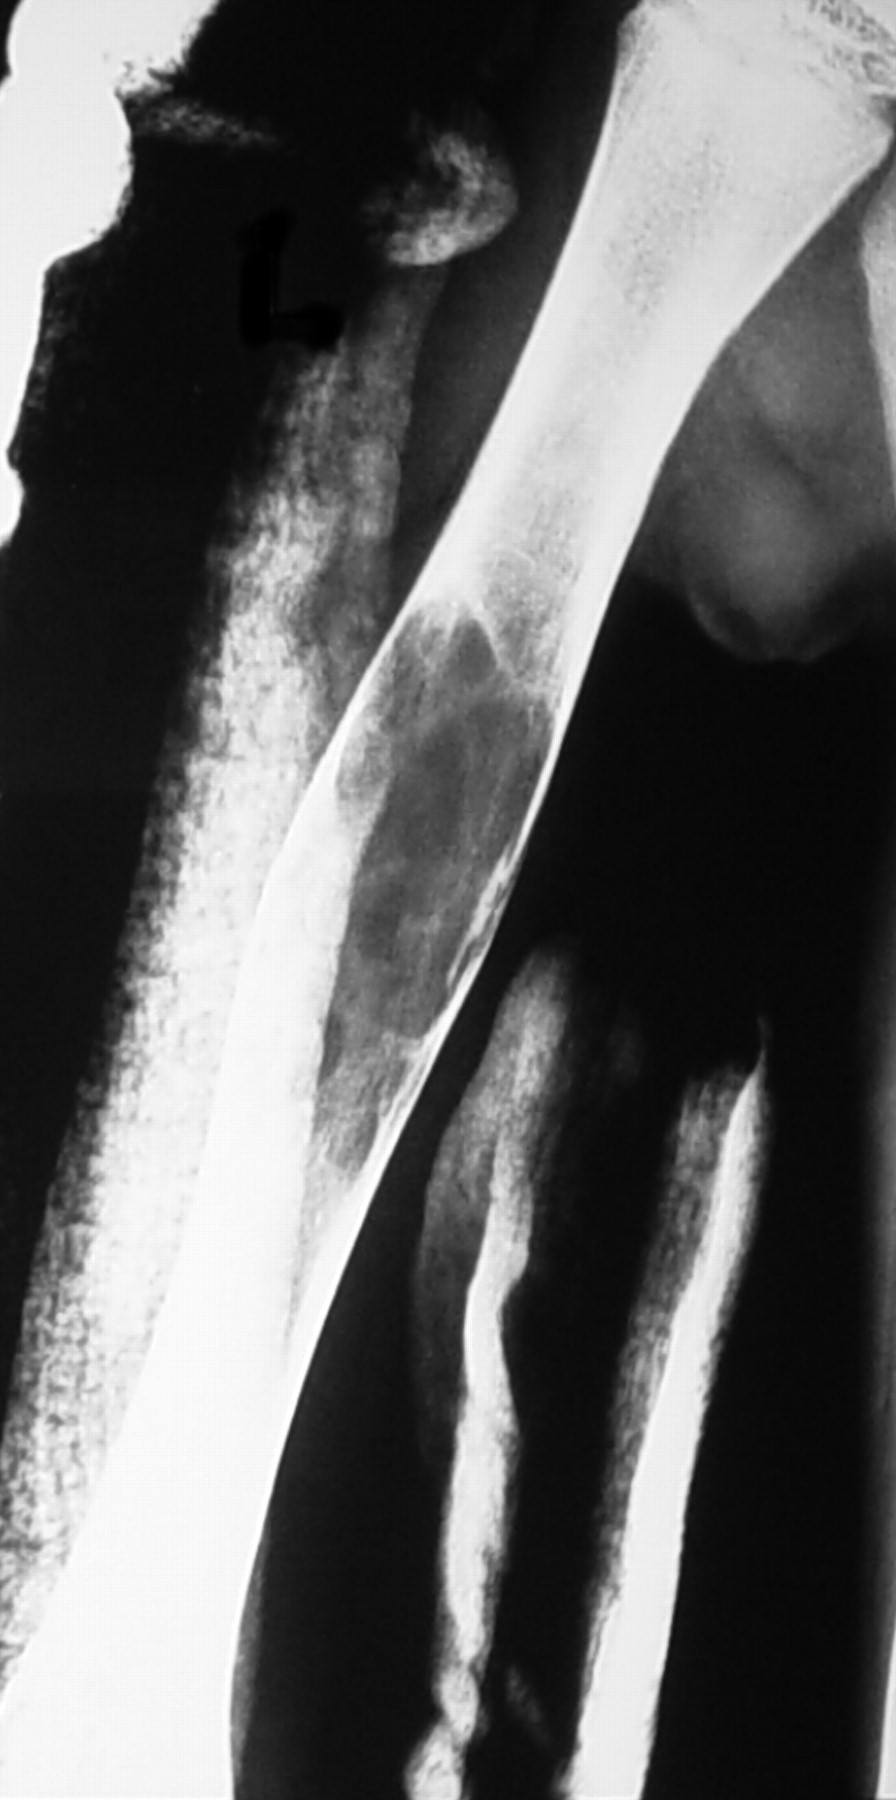 Treatment Of Aneurysmal Bone Cysts With Percutaneous Sclerotherapy